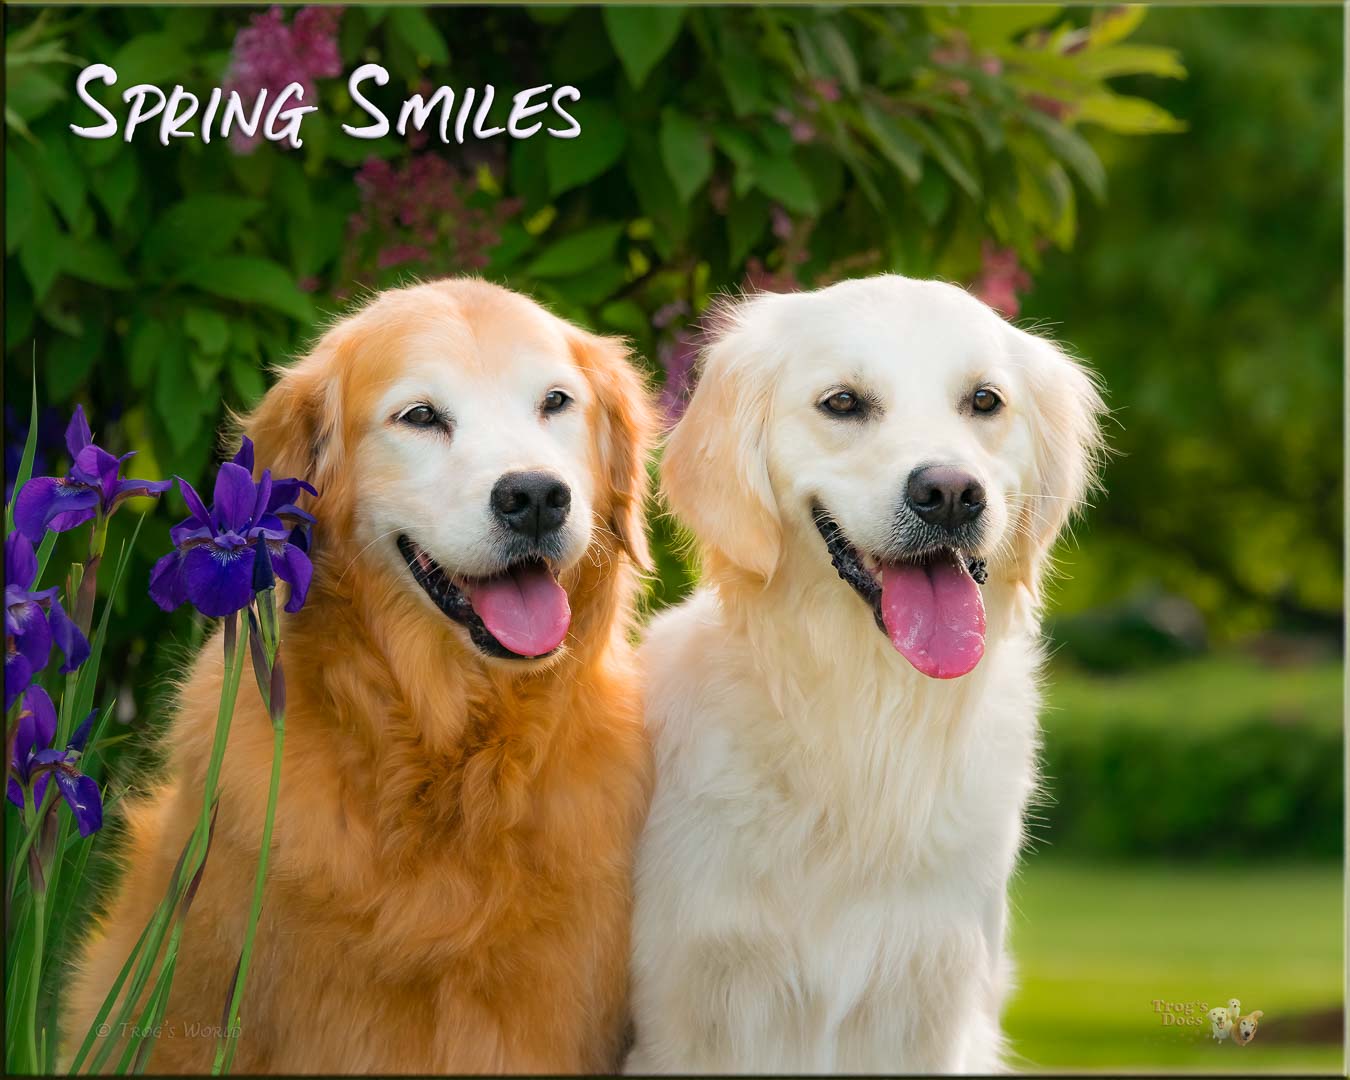 Two Golden Retrievers on a spring day